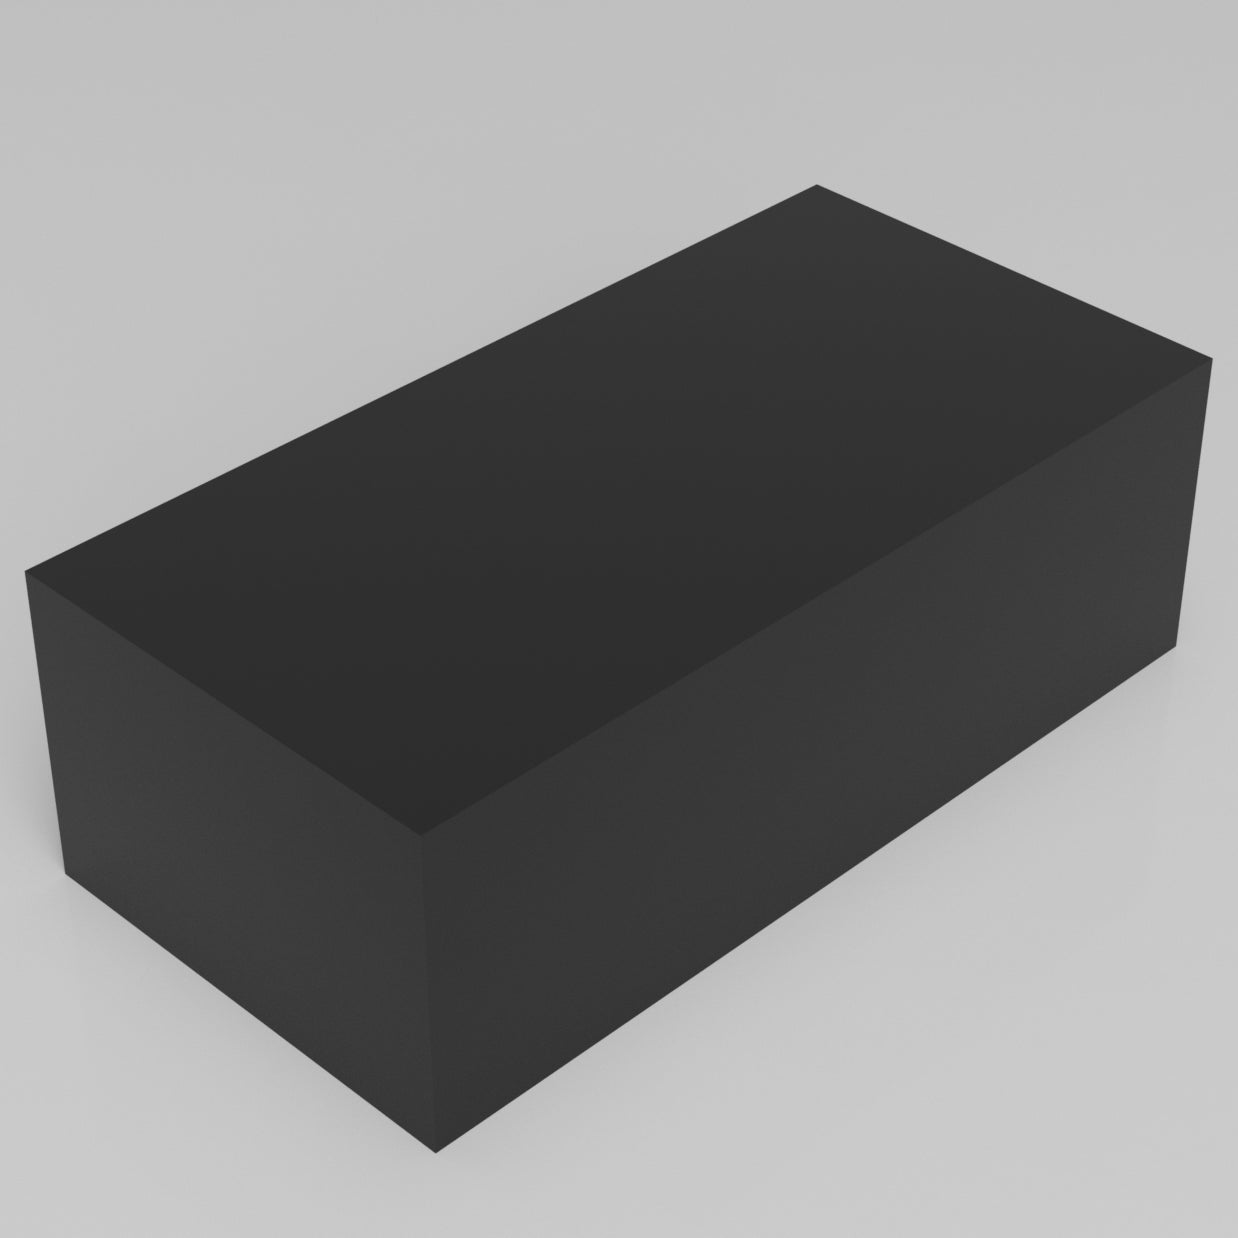 Machinable Wax Rectangular Block Front View 4 Inch by 6 Inch by 12 Inch